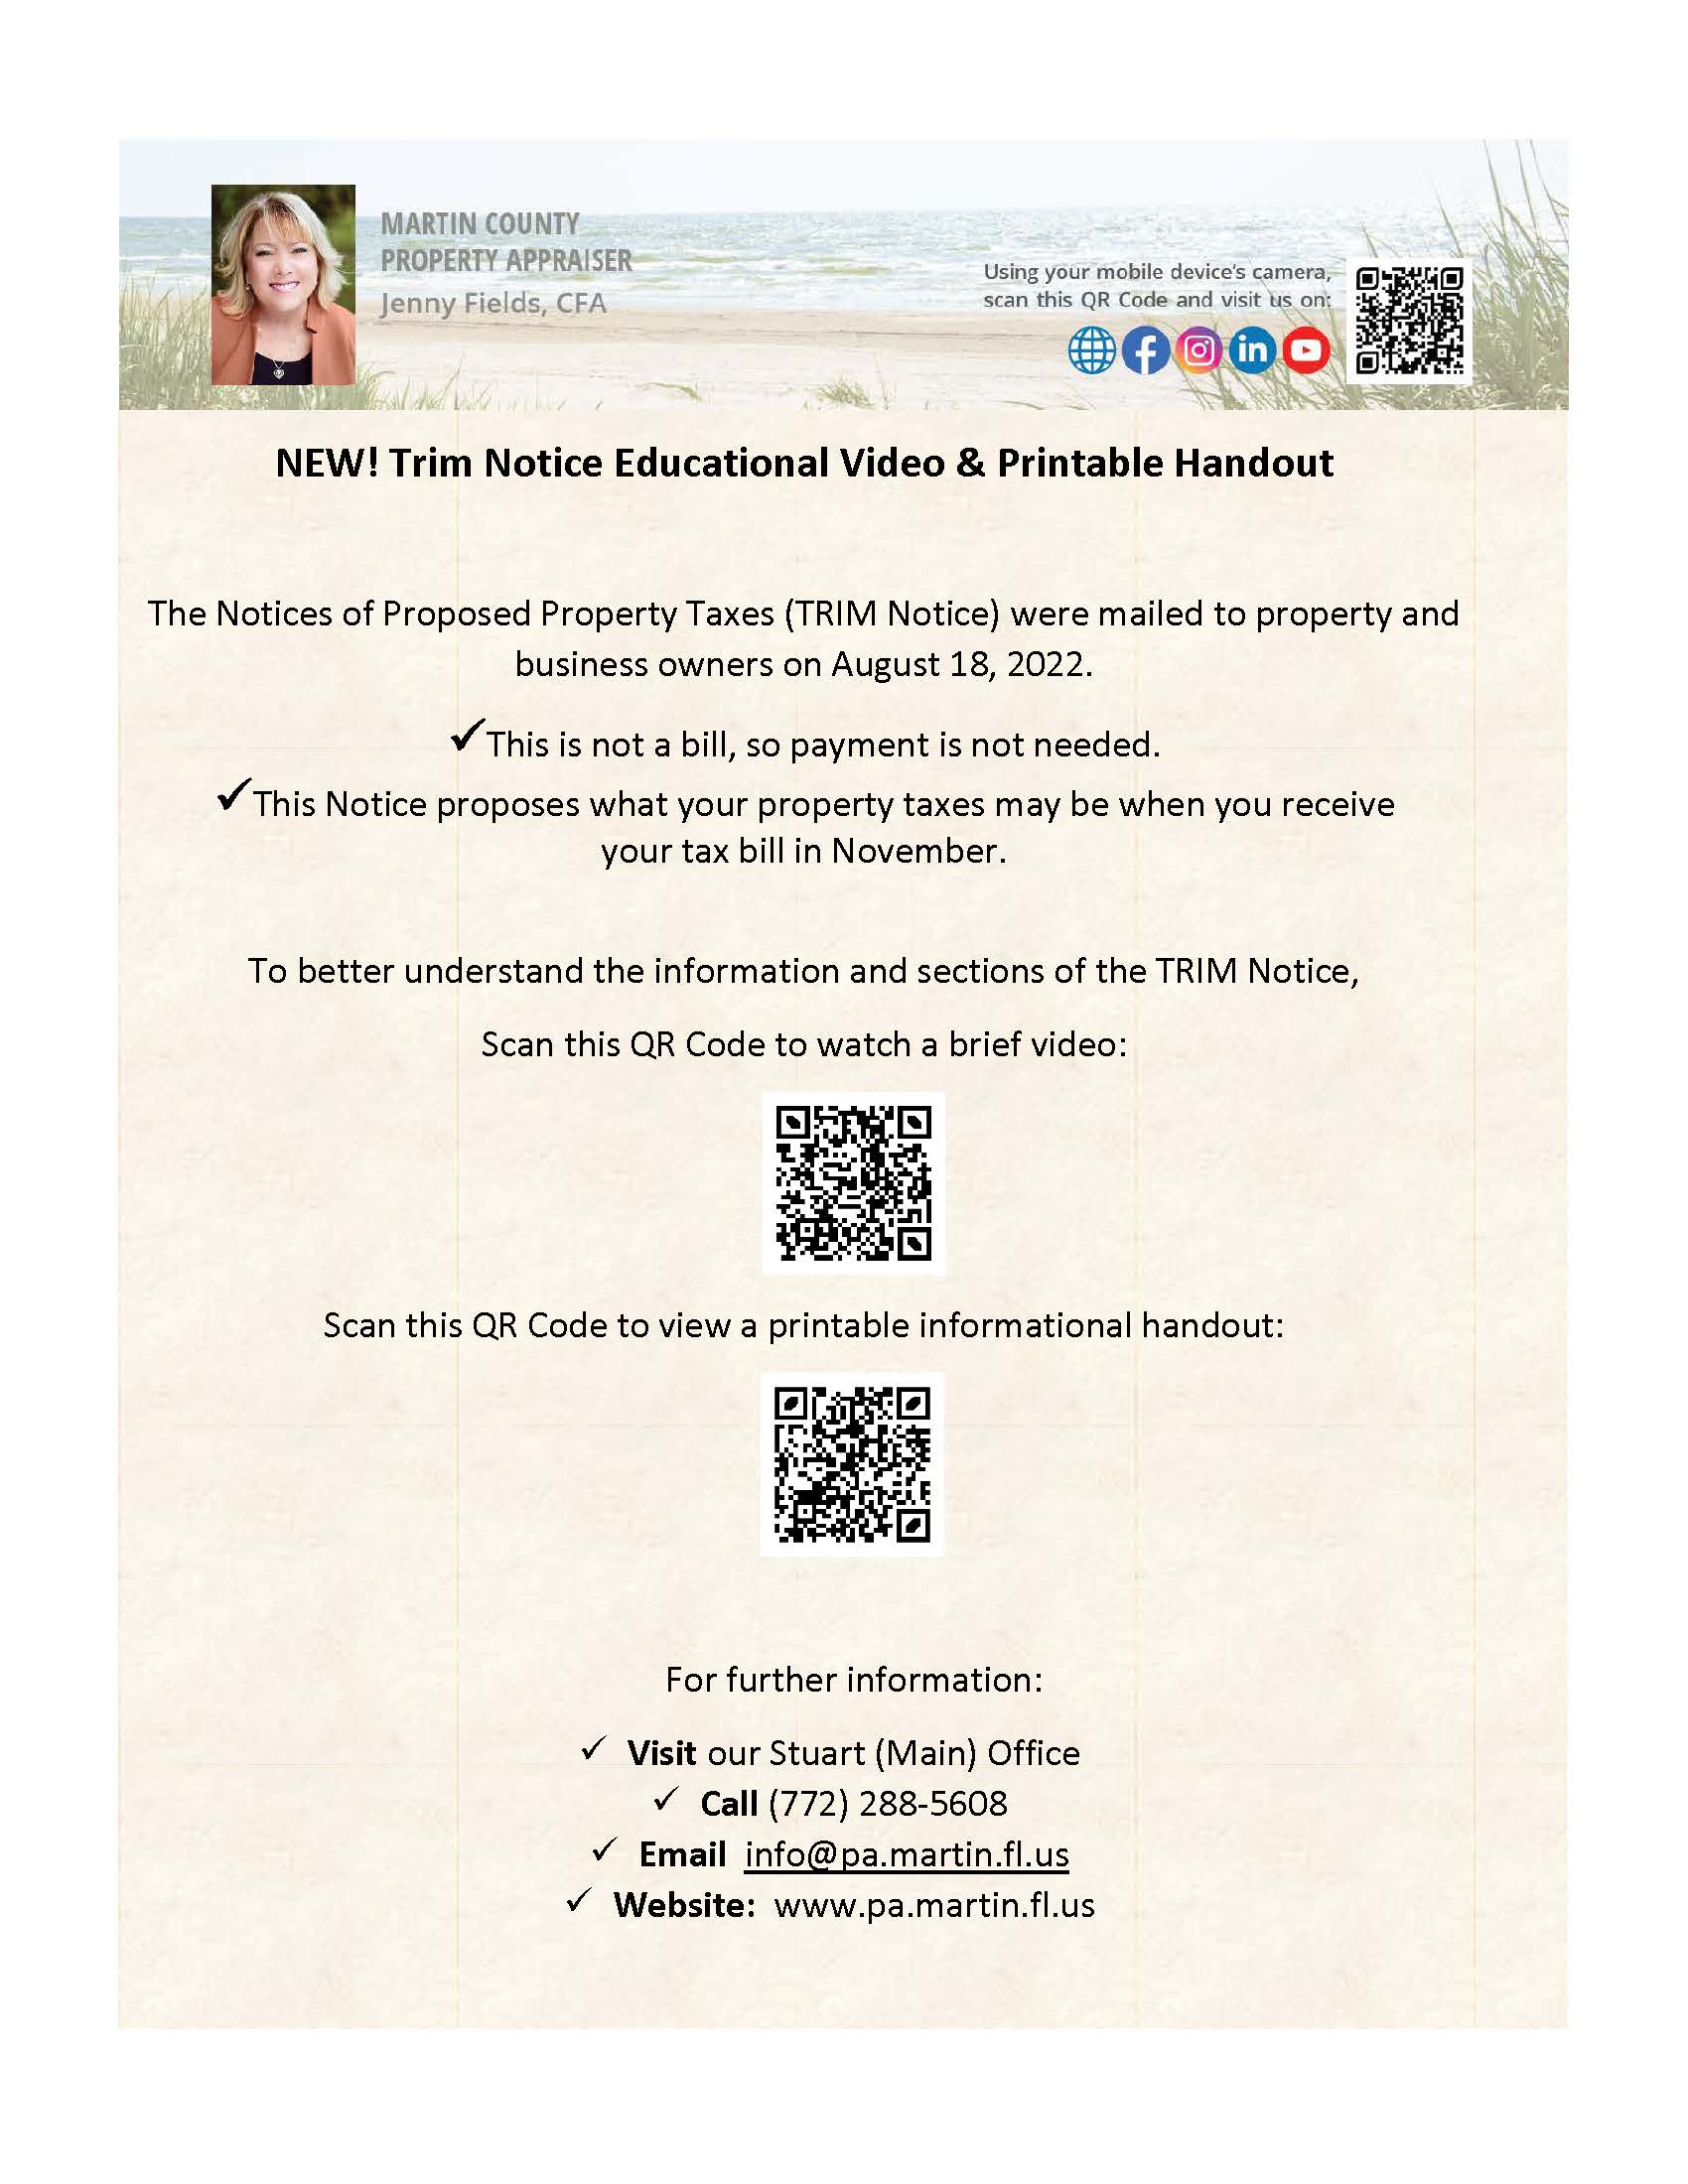 Martin County Property Appraiser Notice of Proposed Property Taxes TRIM with QR Codes